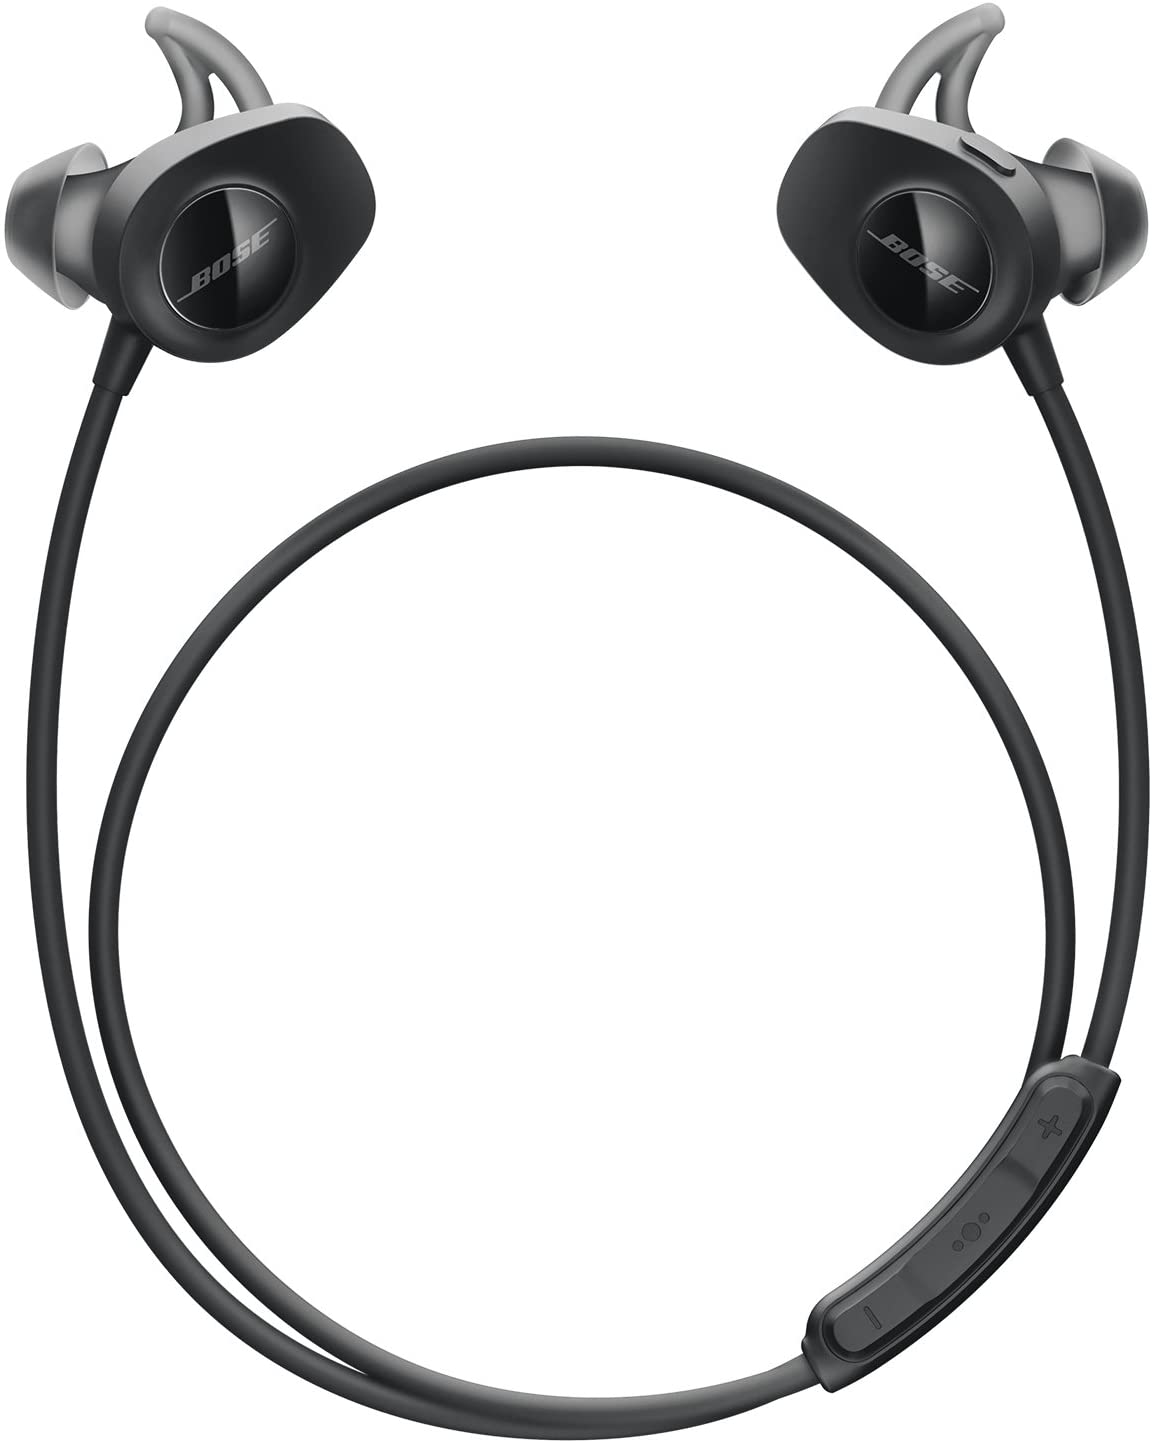 Bose SoundSport Weather Resistant Wireless Earbuds